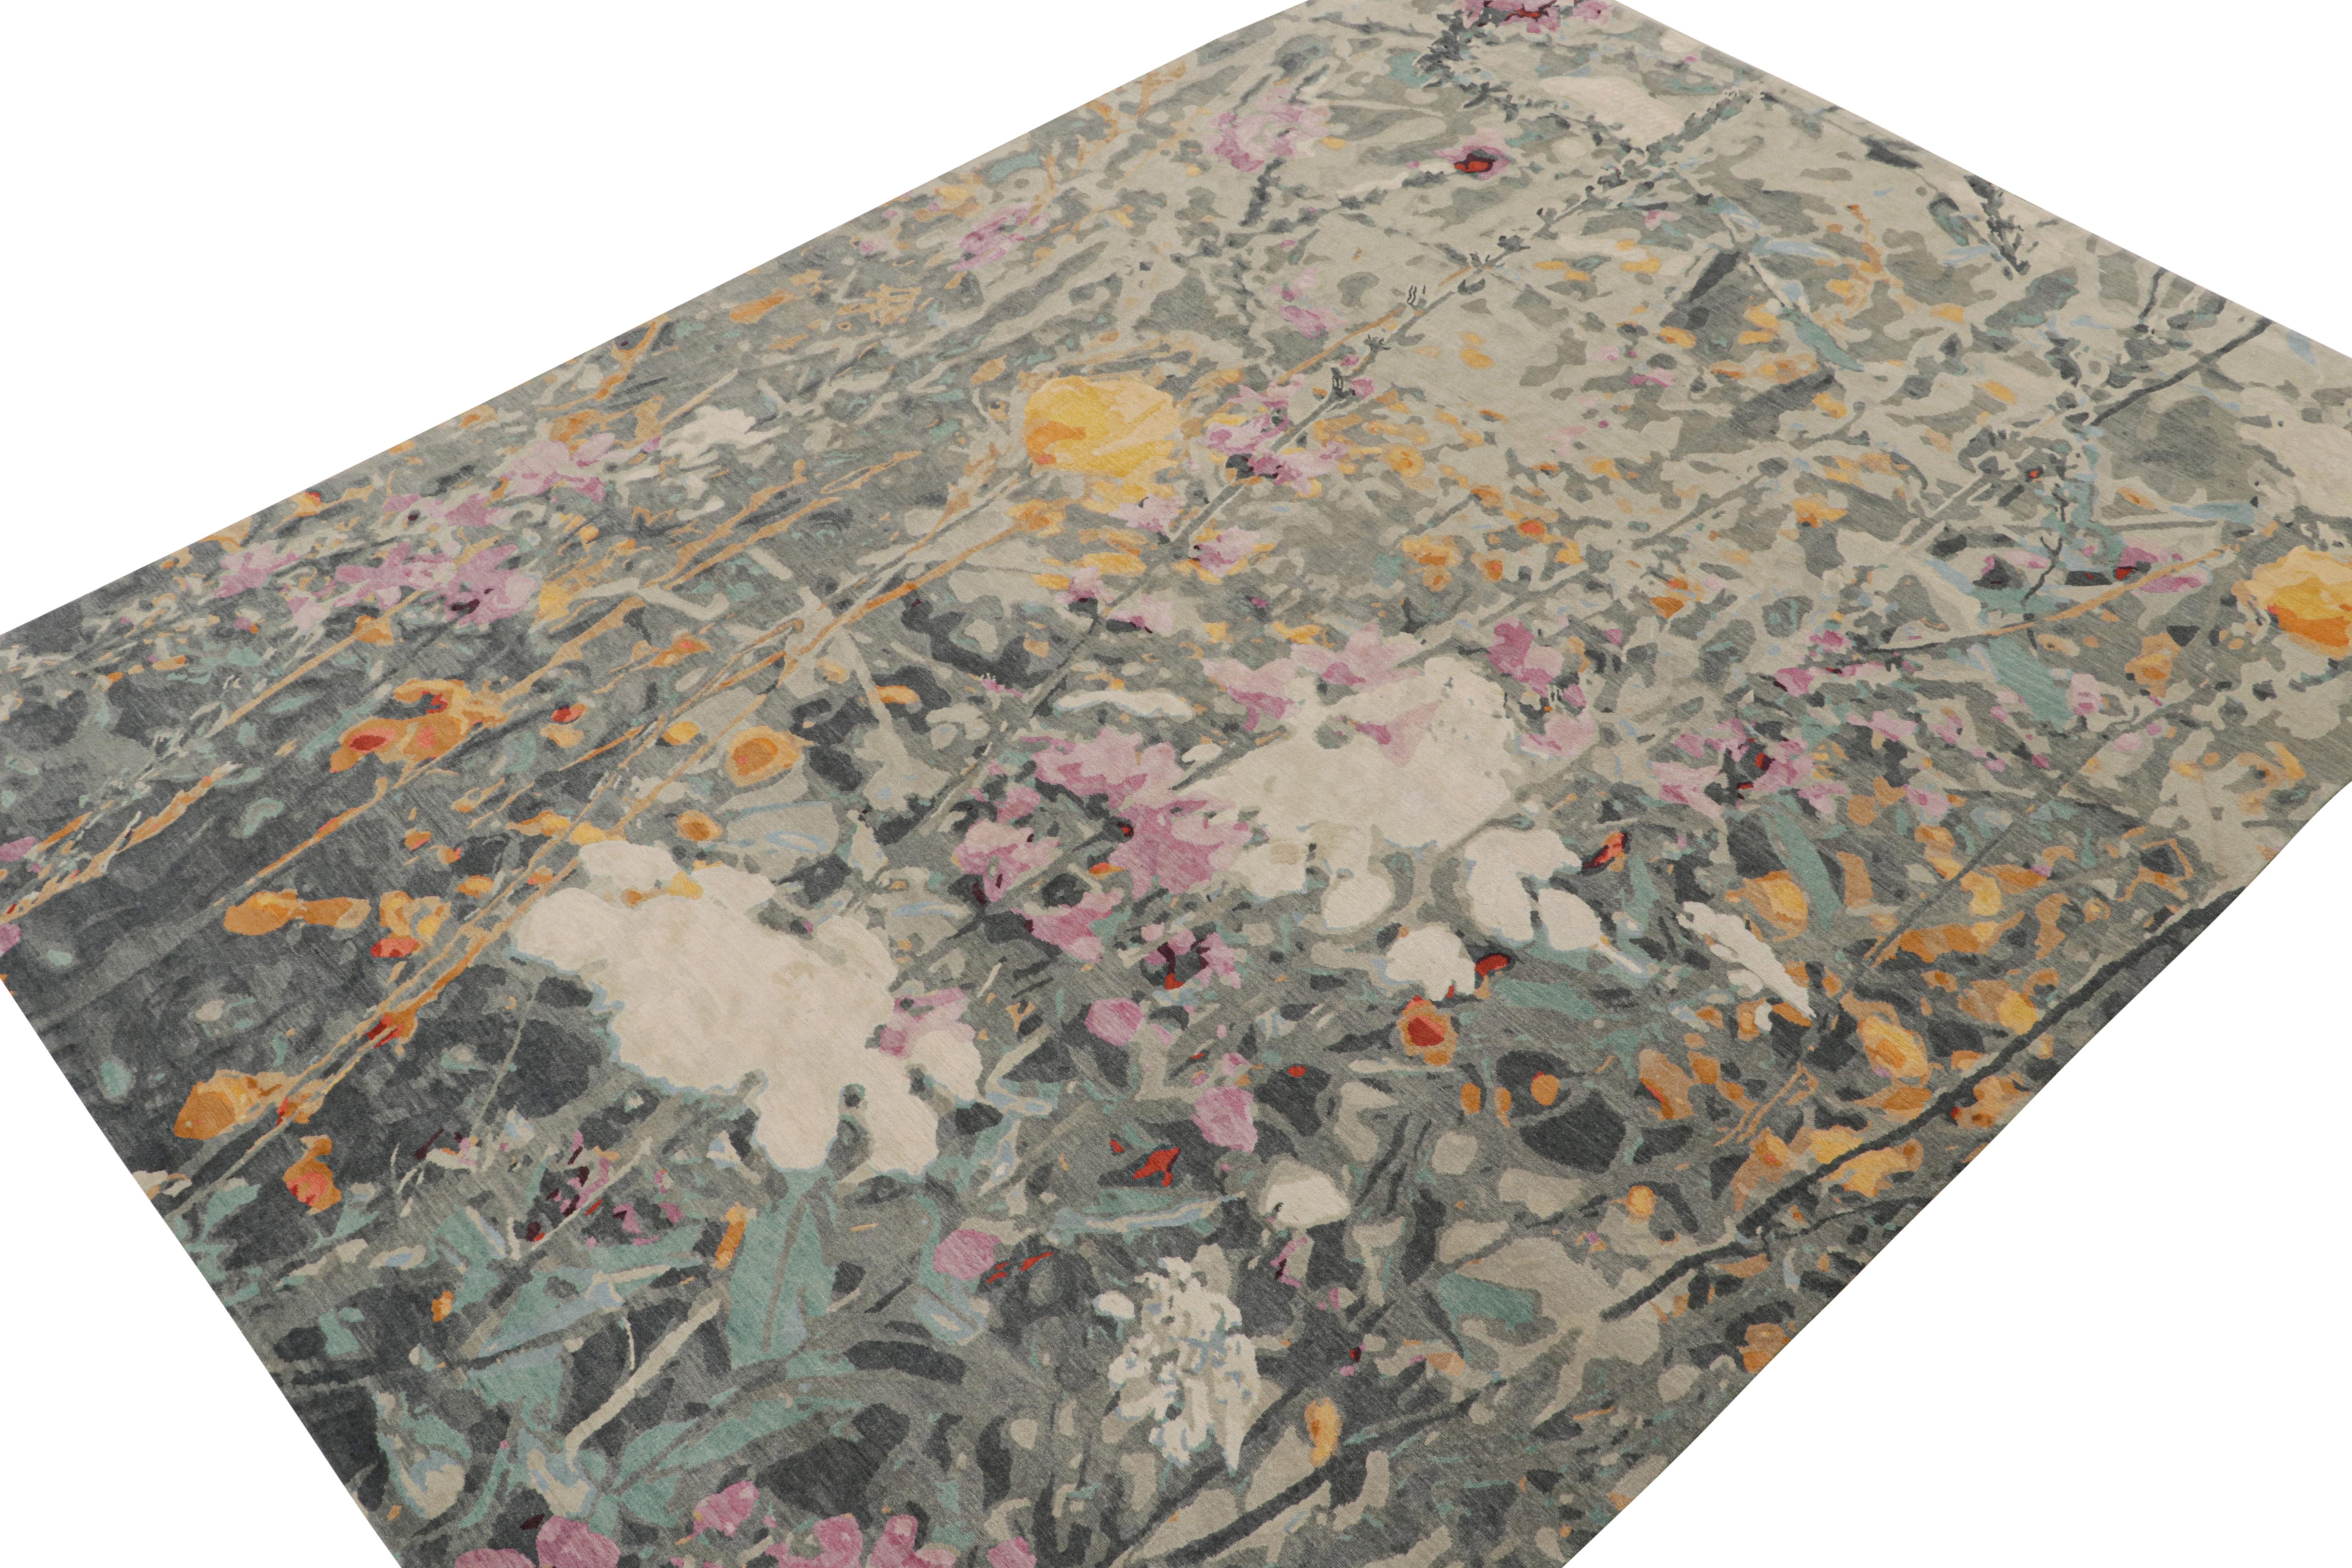 From Rug & Kilim’s Modern collection comes this 9x12 contemporary botanical rug with fine wool & silk handknotting.

On the Design: 

The rug features an all over floral pattern inspired by impressionist paintings. The density of design & symphony